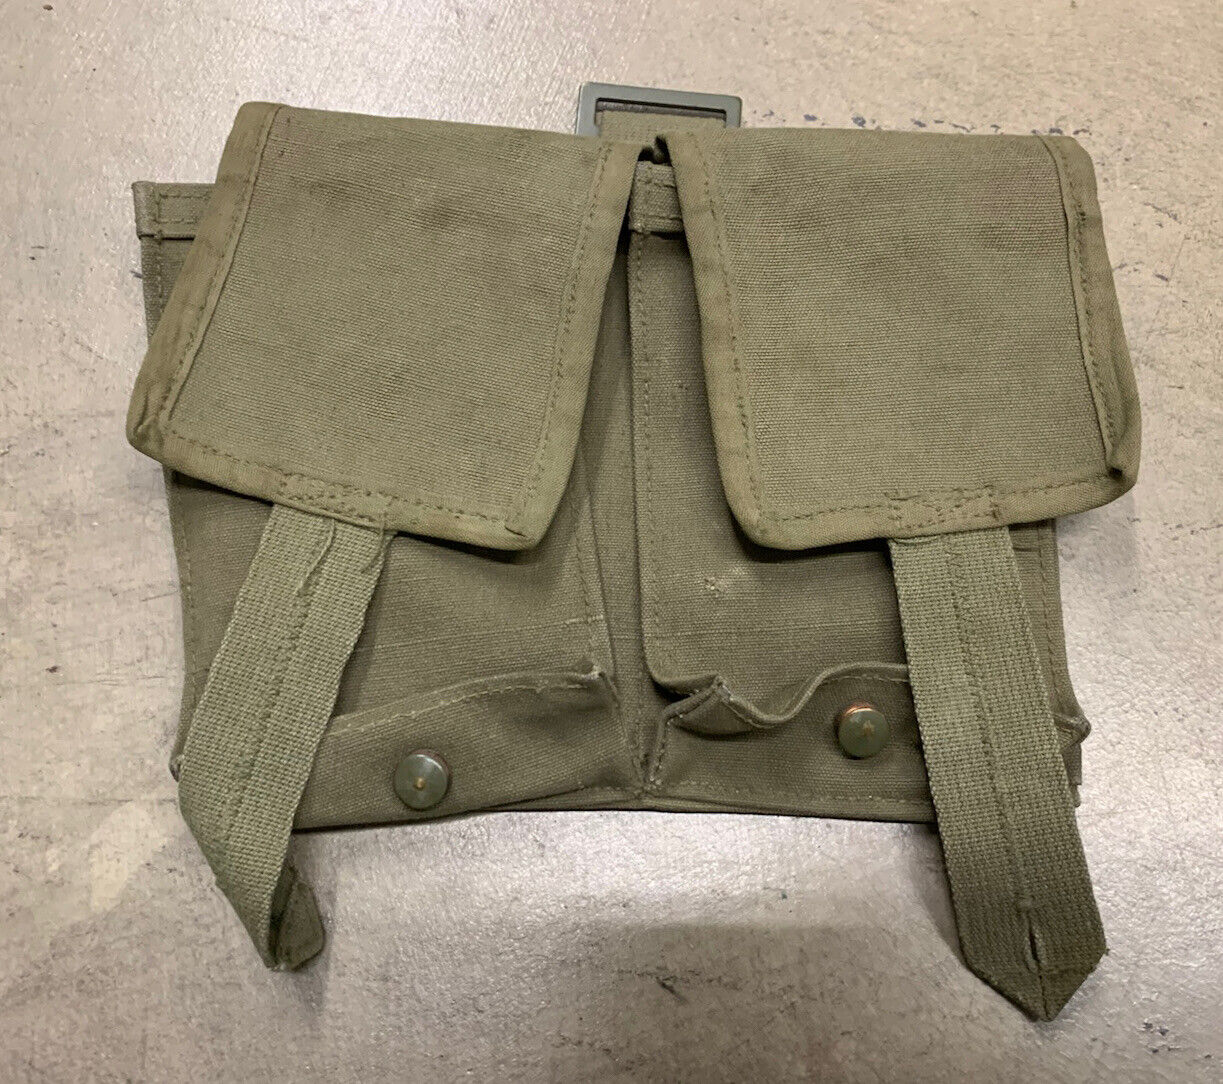 Spanish Military Issue Ammo Magazine Pouch